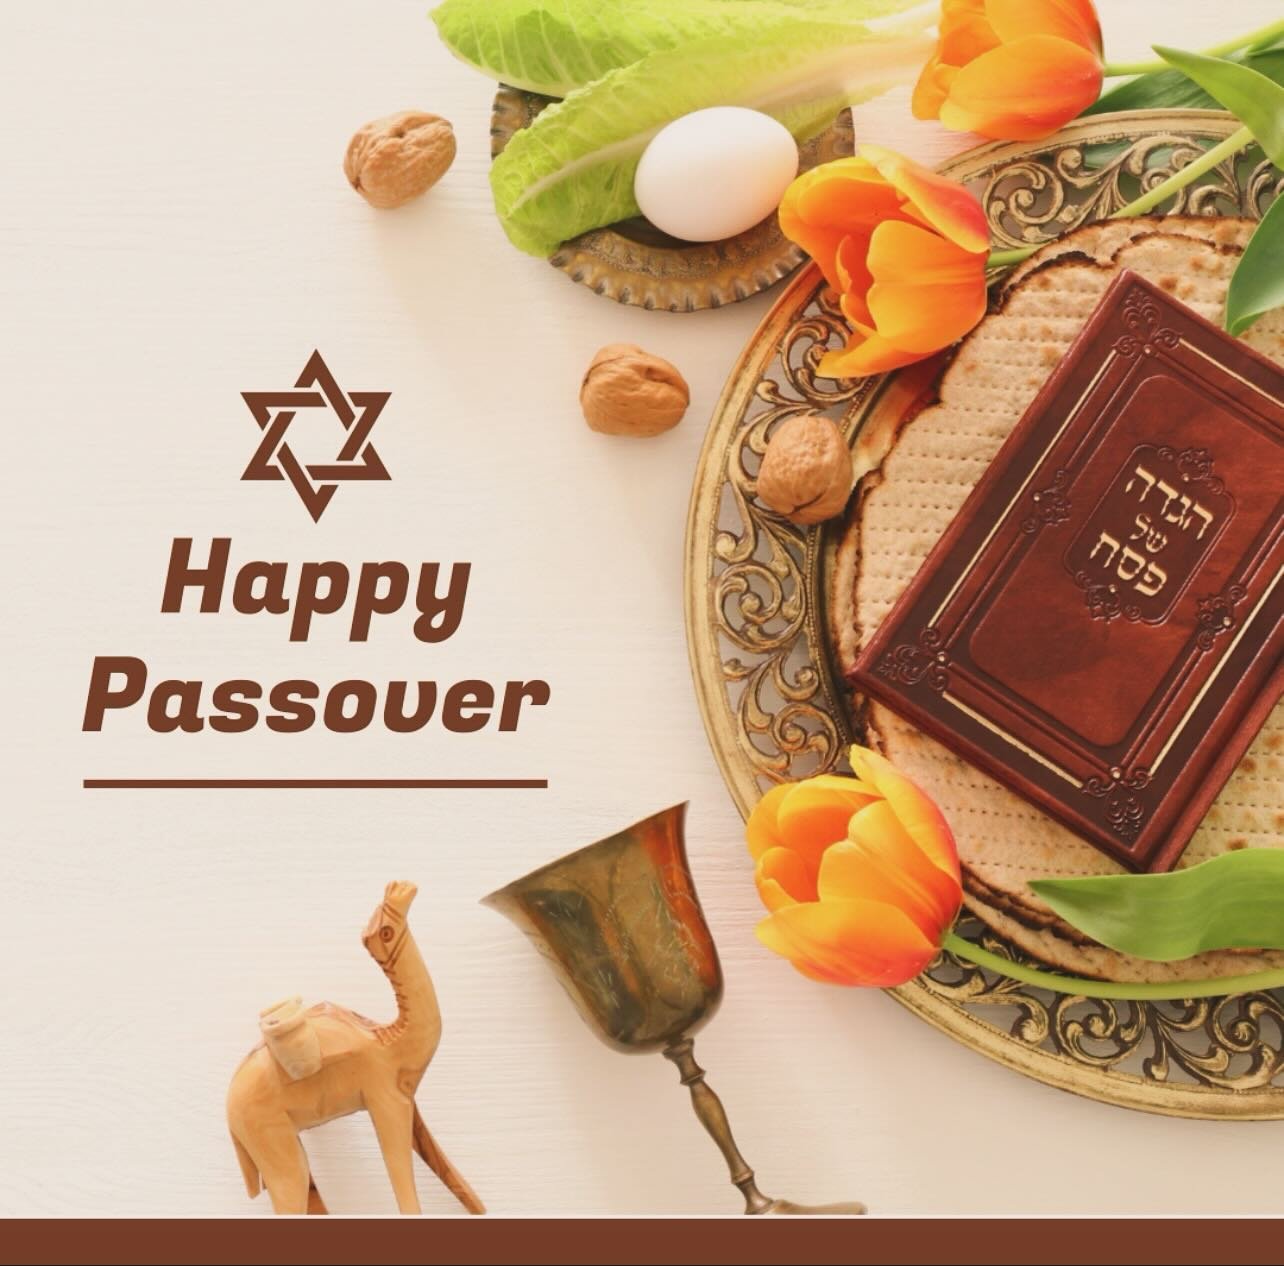 We extend warm wishes for a joyful Passover to all our Pickleball family and their friends who observe this holiday.🏓❤️